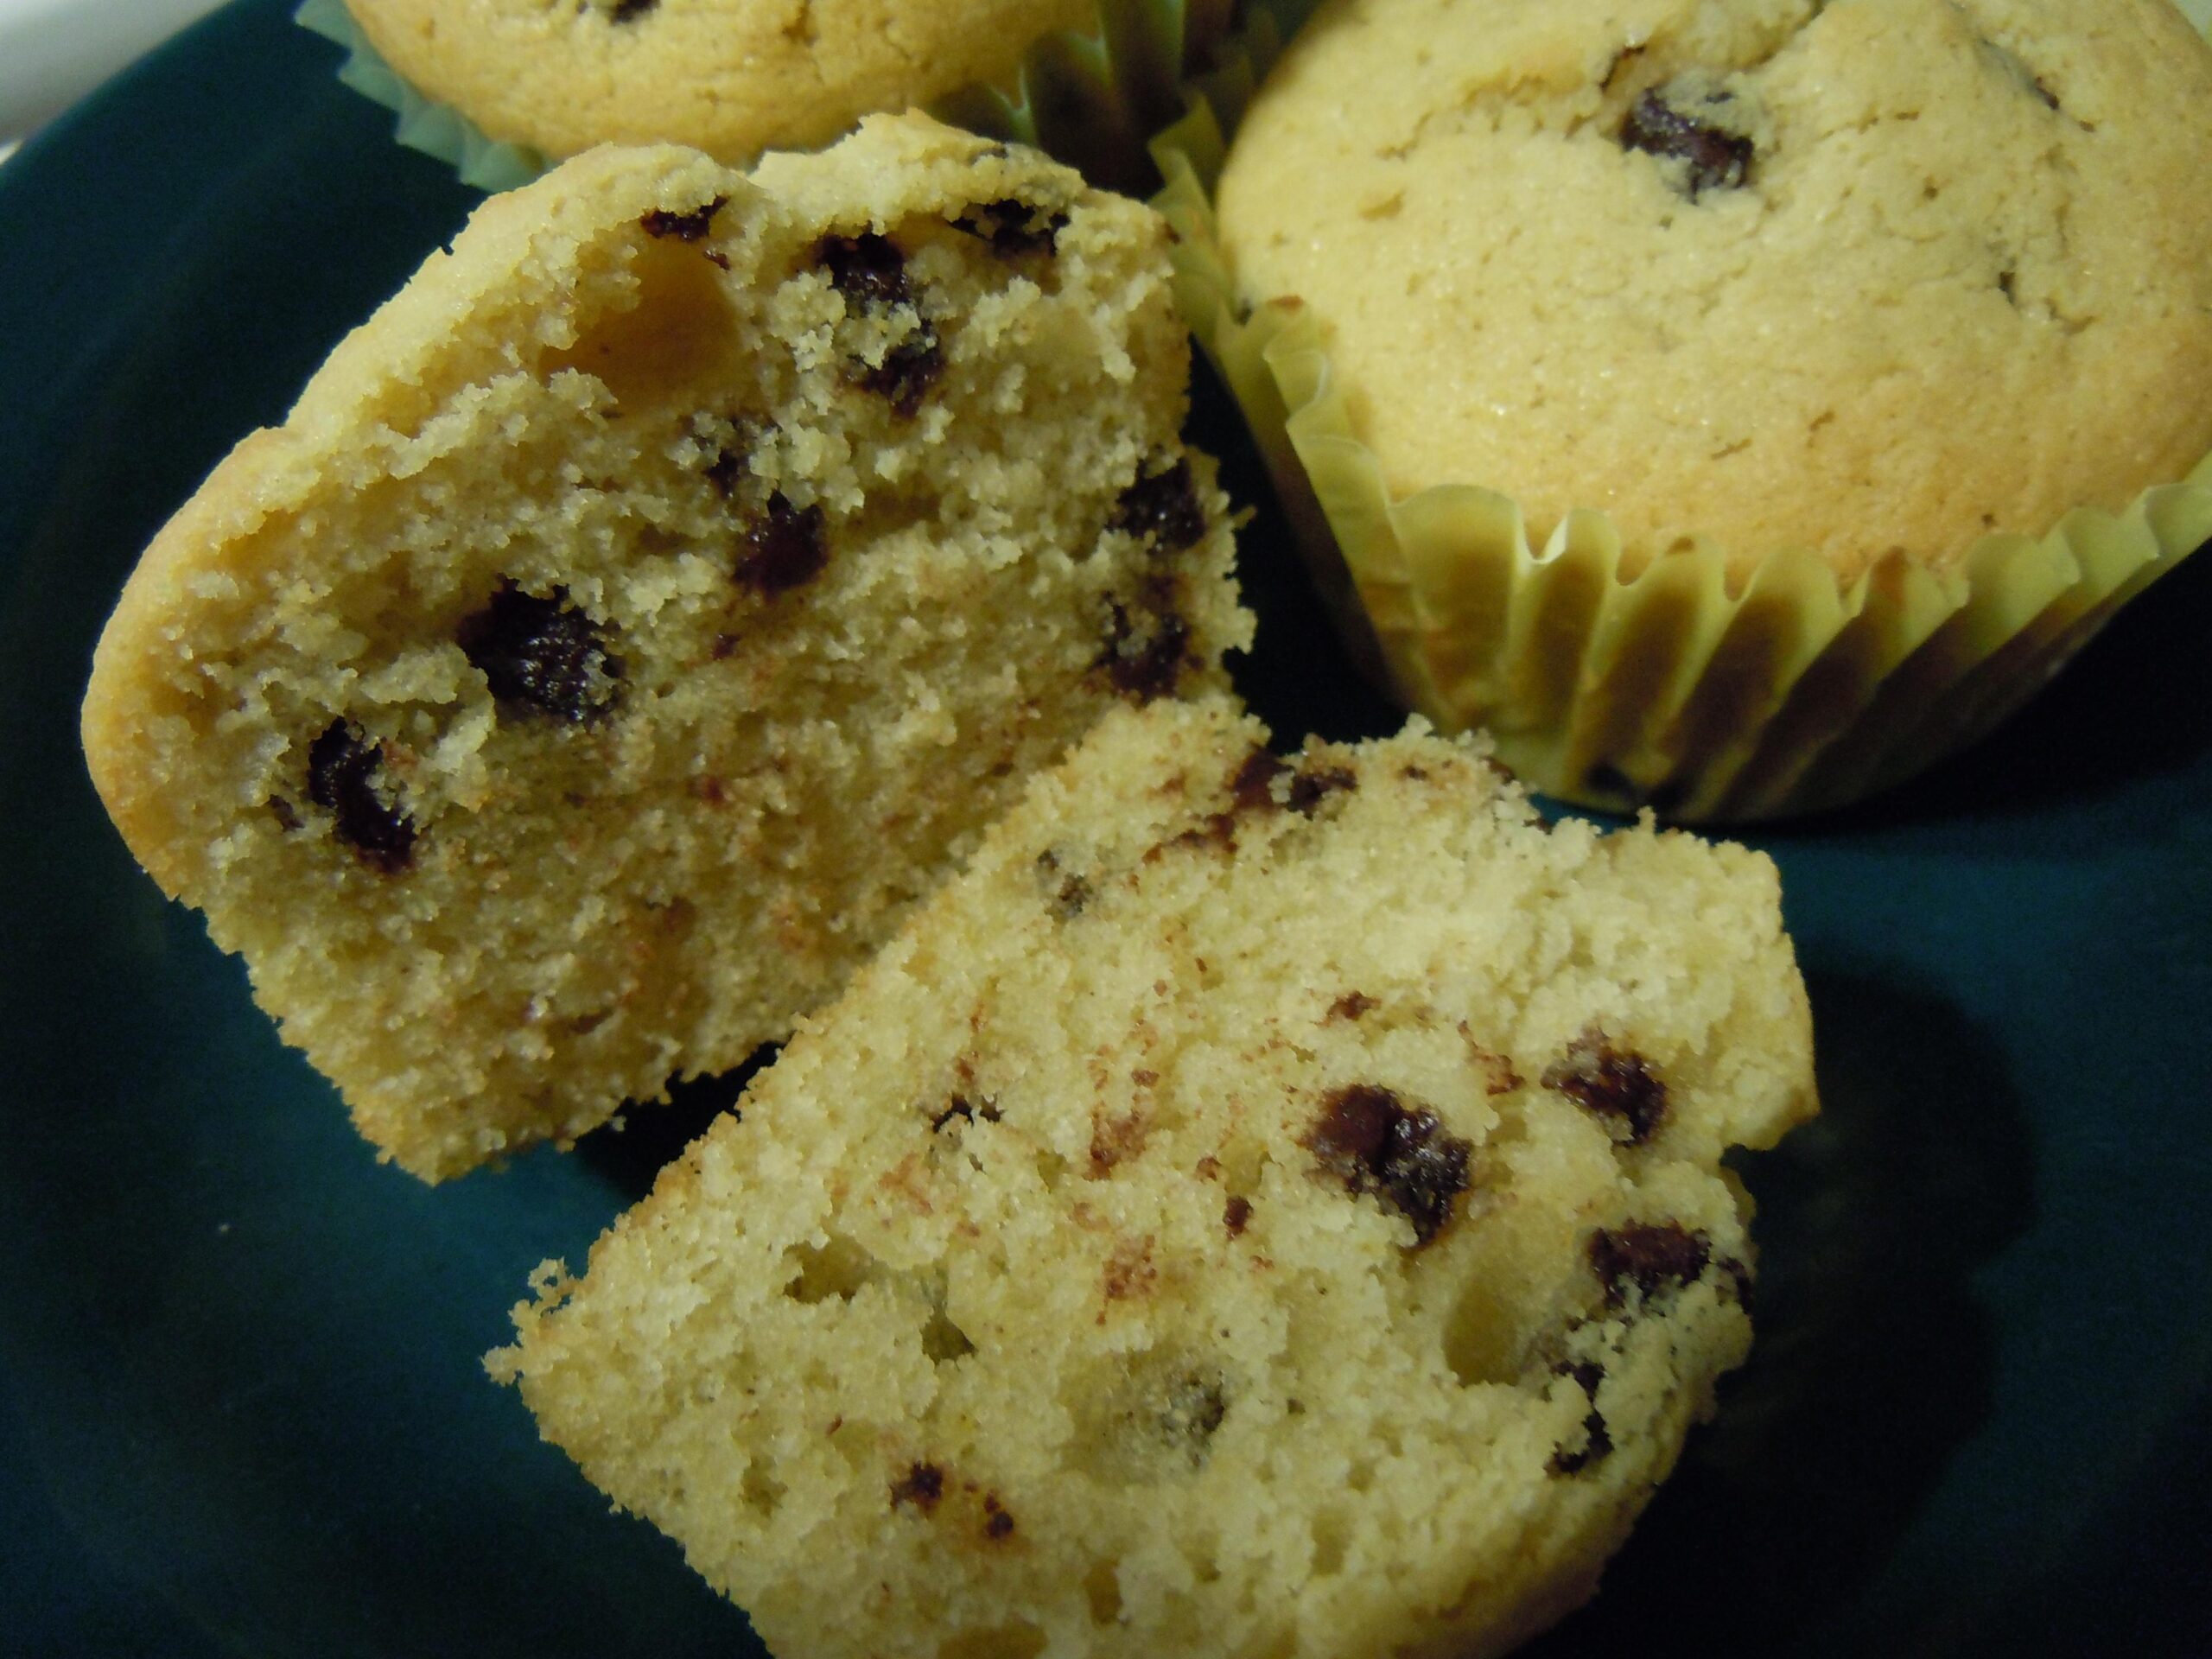  A perfect blend of moist and crumbly gluten-free muffins topped with a generous sprinkle of chocolate chips!